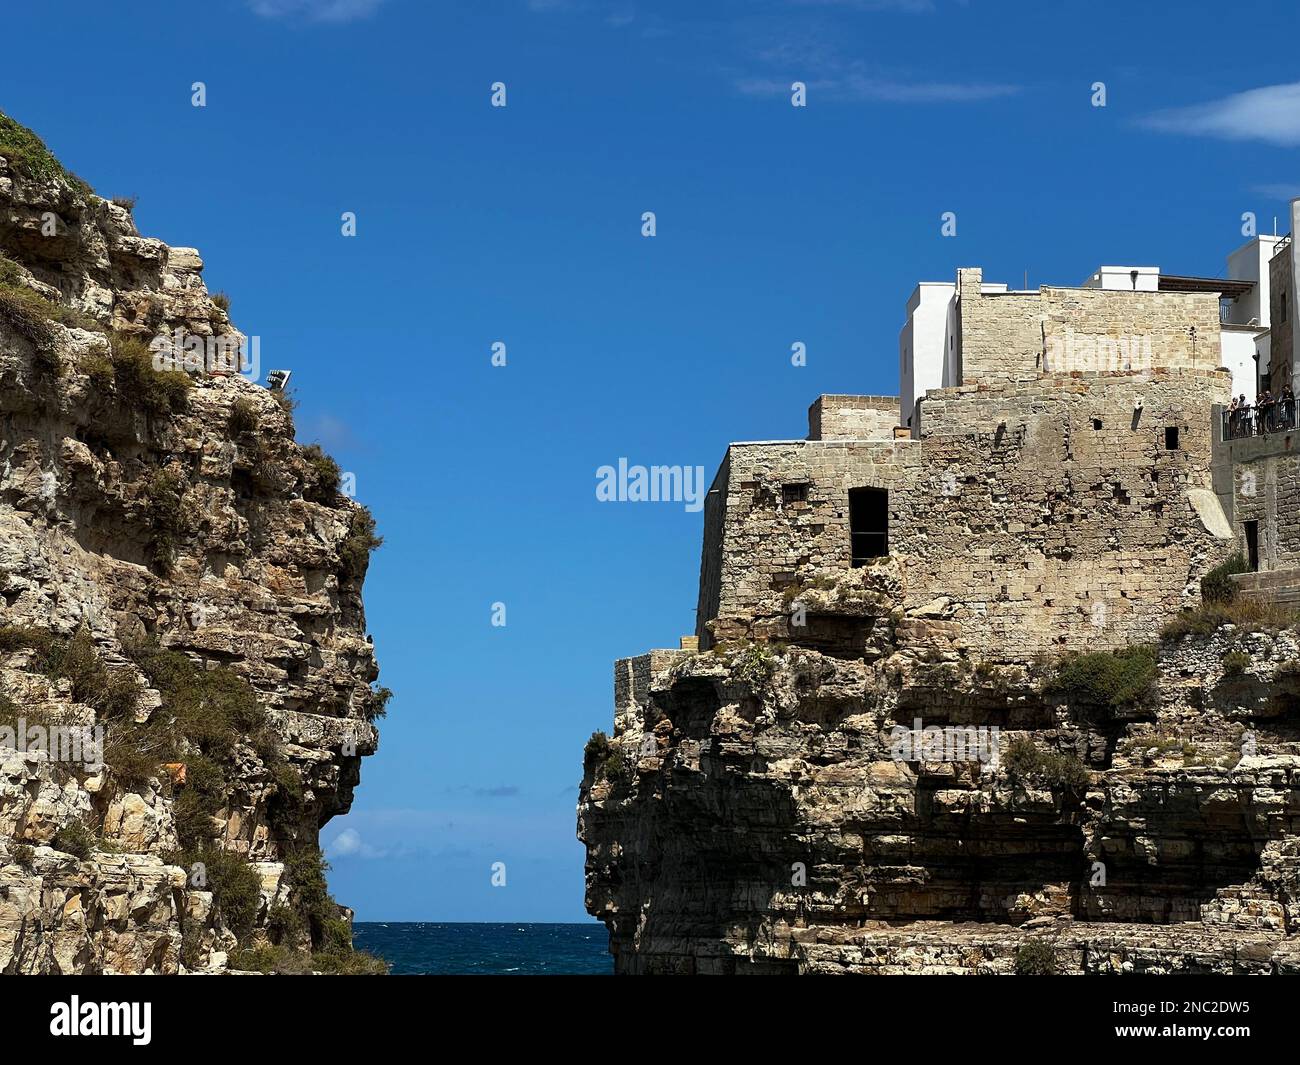 Surrounded by limestone cliffs and ancient stone buildings overlooking the sparkling watersw of the Adriatic Sea, the picture perfect Polignano a Mare Stock Photo